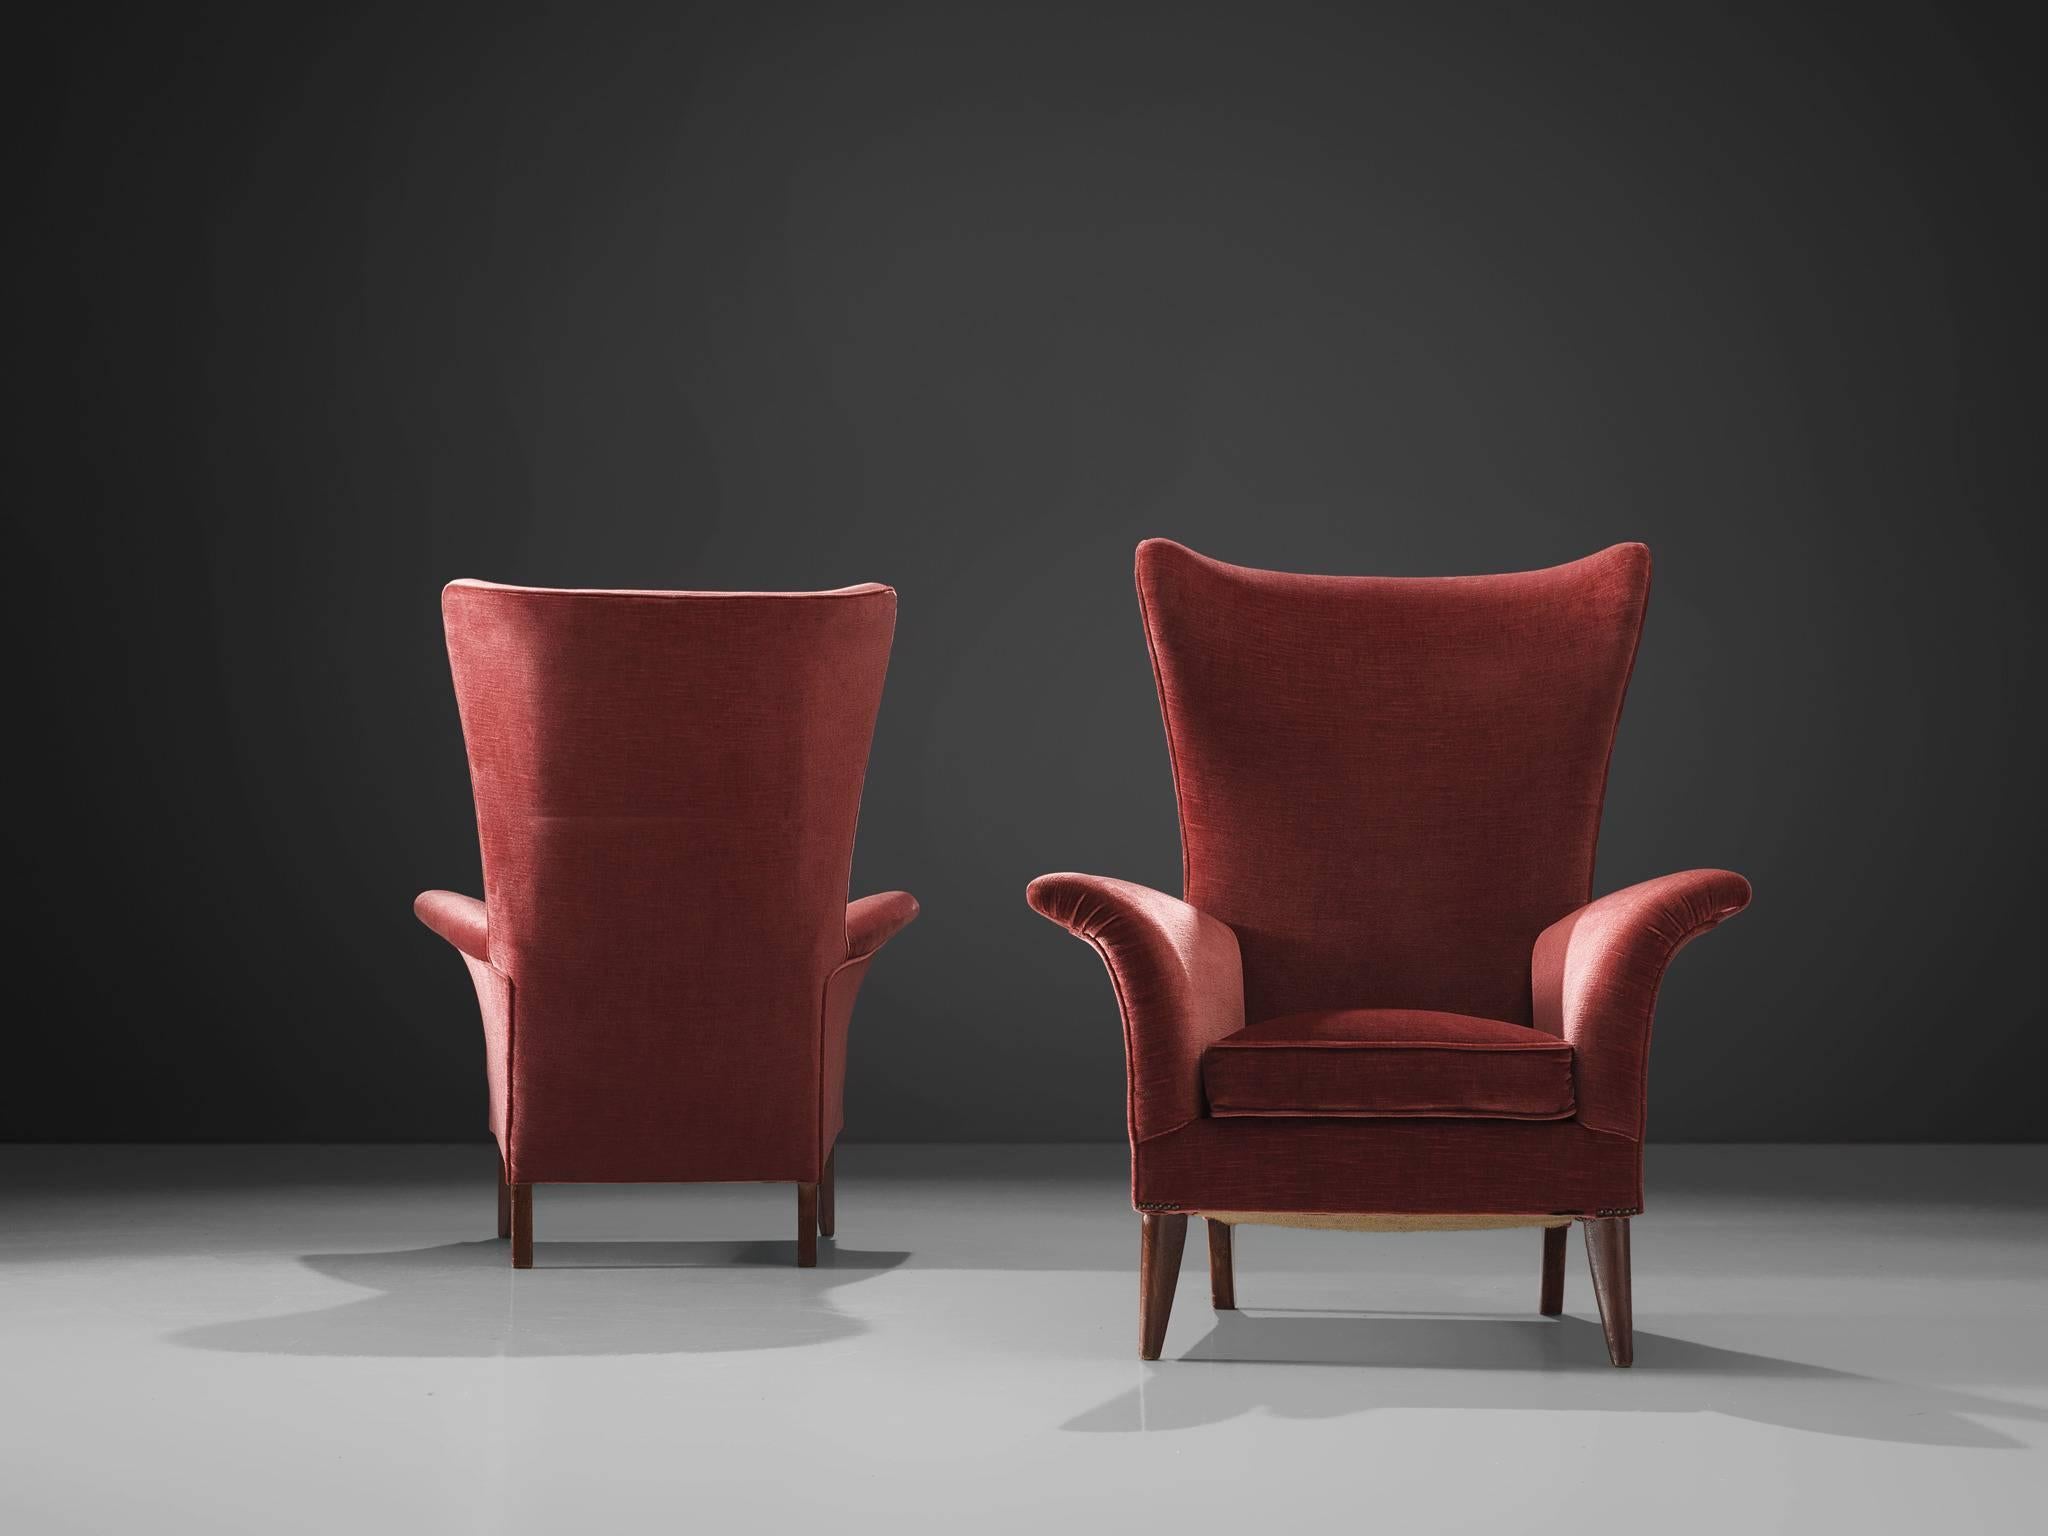 Set of two high wingback chairs, pink velvet and wood, Italy, 1950s. 

Pair of elegant Italian pink to red wingback lounge chairs. Beautiful organic formed seating, with solid wooden legs. The gentle flared armrests and seating give this design a